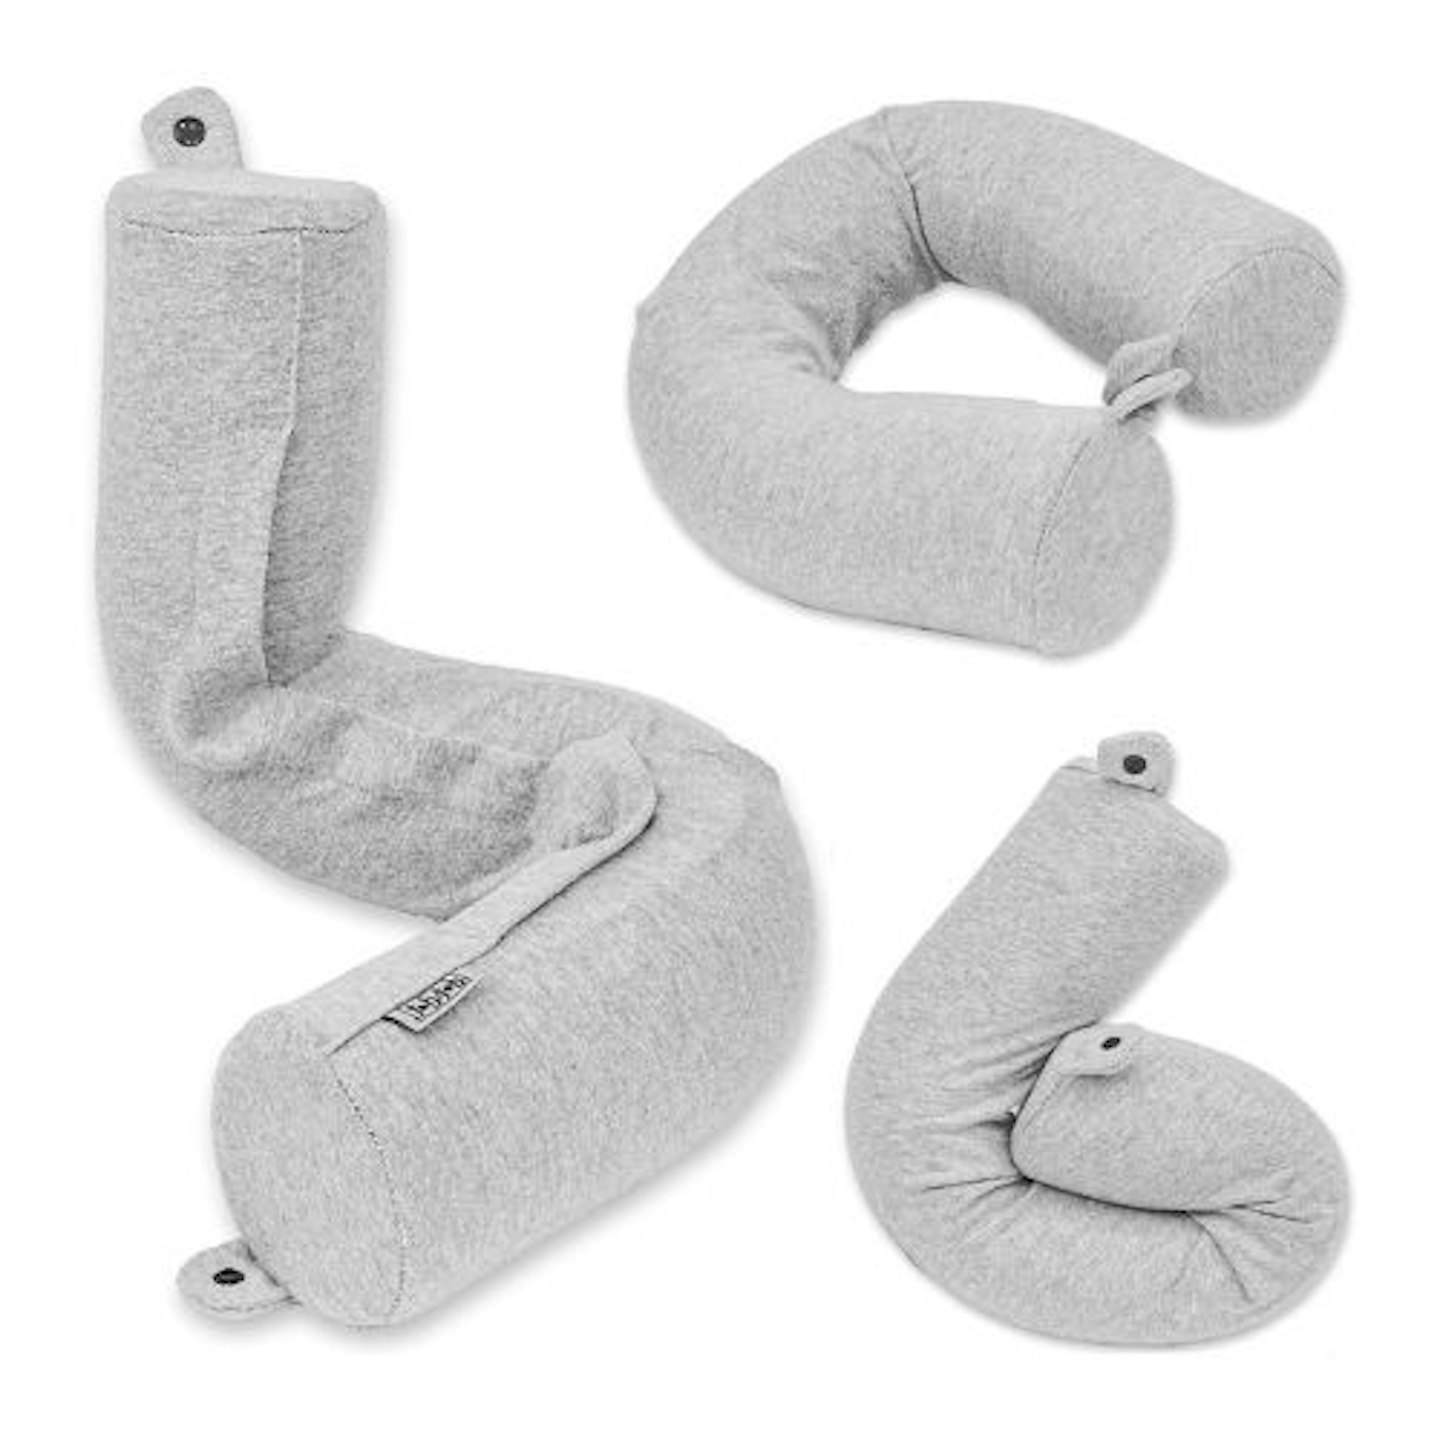 Twist Memory Foam Travel Pillow for Neck, Chin, Lumbar and Leg Support - for Traveling on Airplane, Bus, Train or at Home - Best for Side, Stomach and Back...